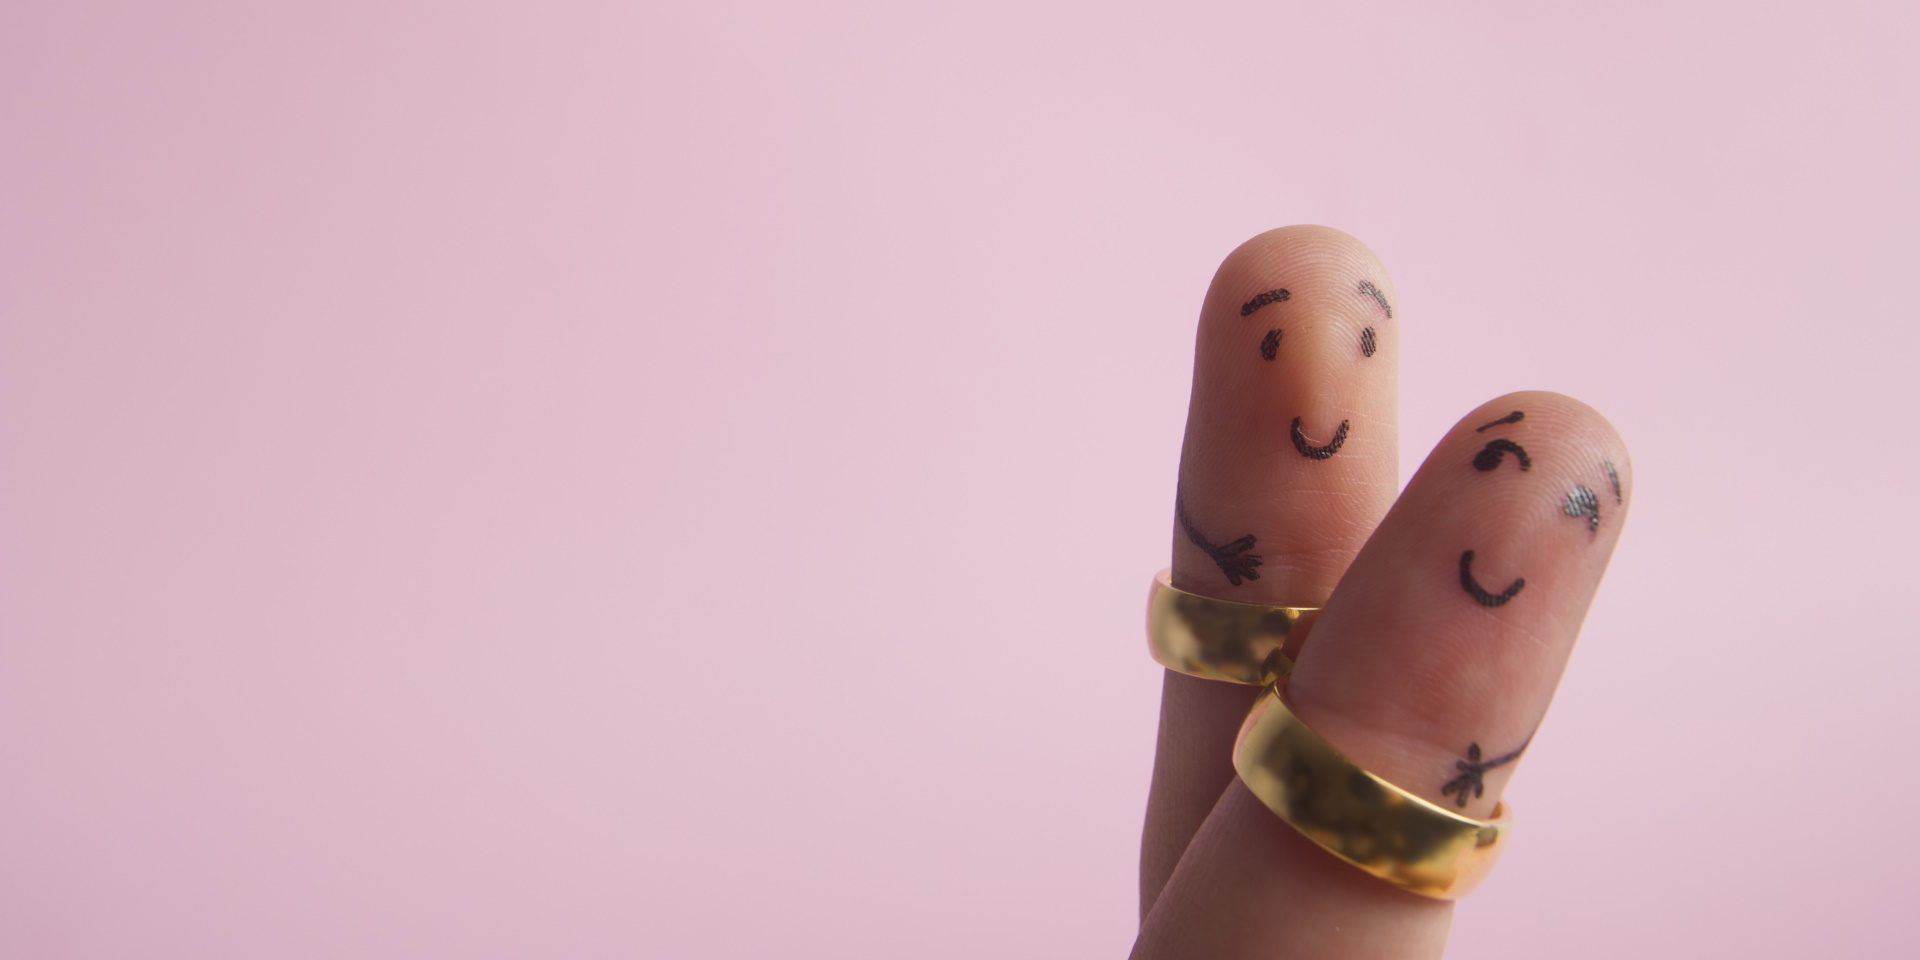 Painted happy family fingers smiley in love with marriage wedding rings.